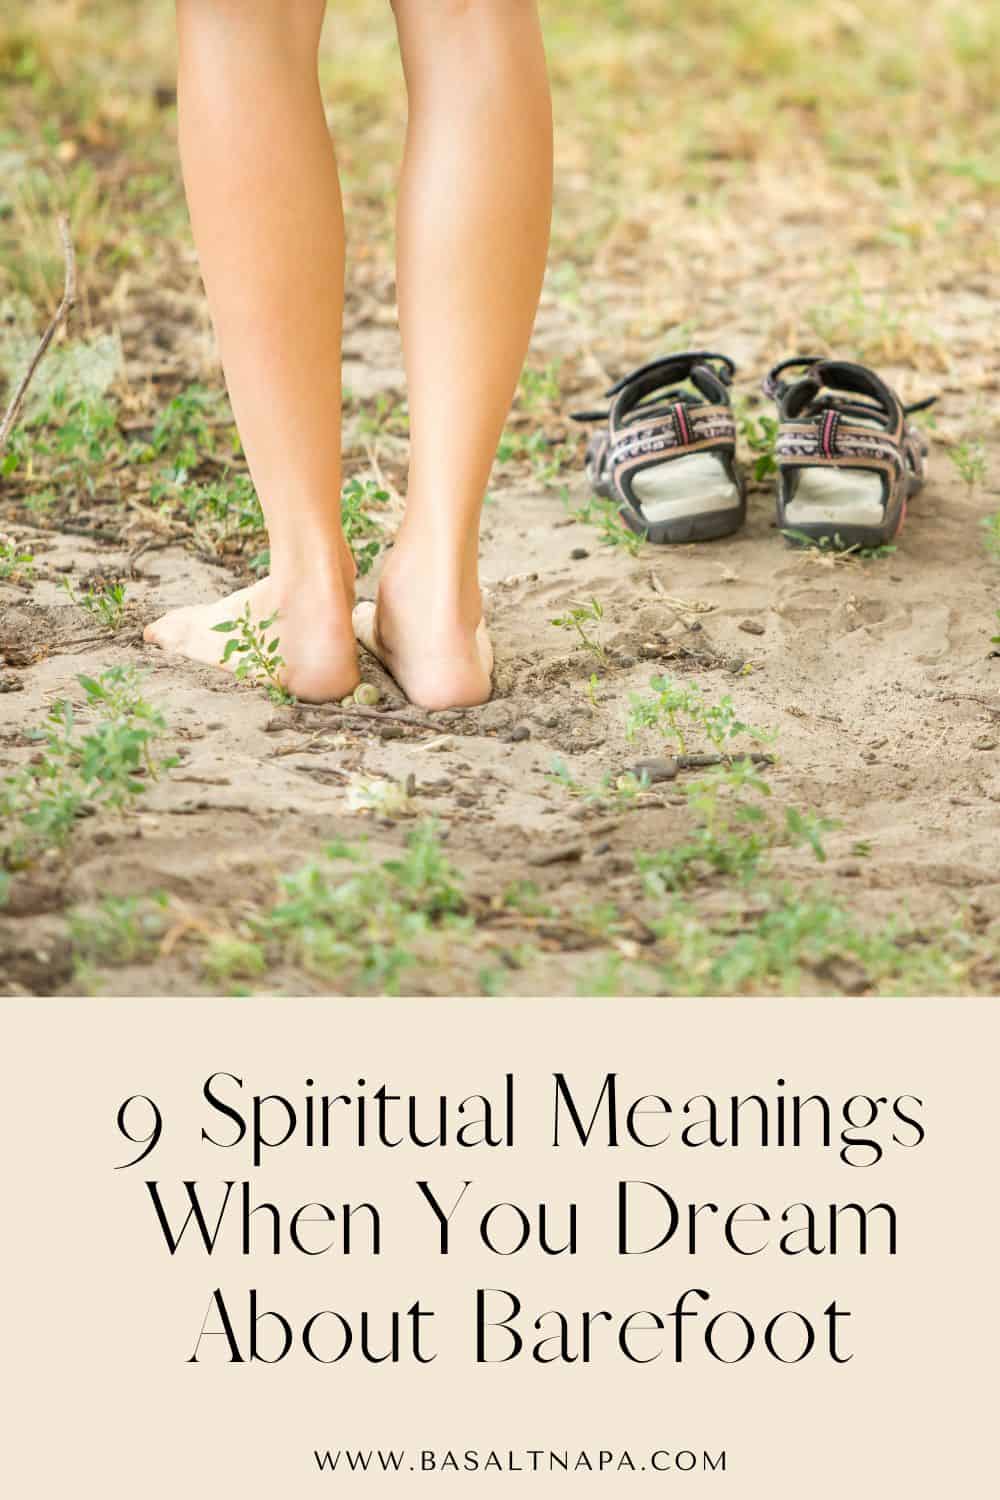 9 Spiritual Meanings When You Dream About Barefoot